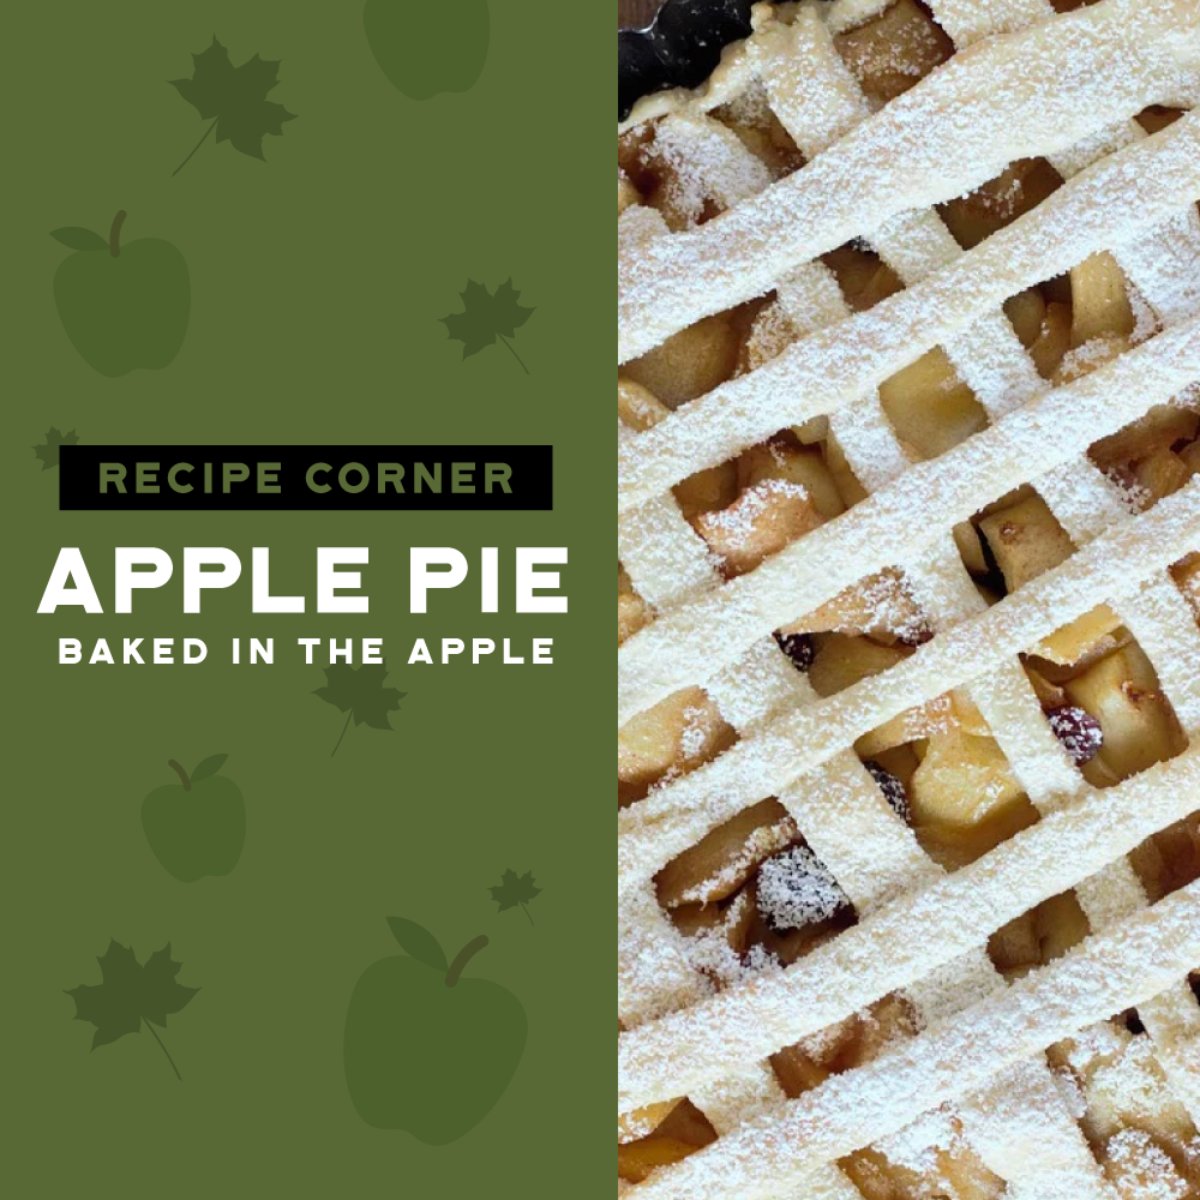 What's a holiday feast without apple pie? Forgo the slices this year and try baking your apple pie directly in the apple for a unique way to serve up this holiday favorite! Find the recipe here: food.com/recipe/apple-p… #applepie #recipecorner